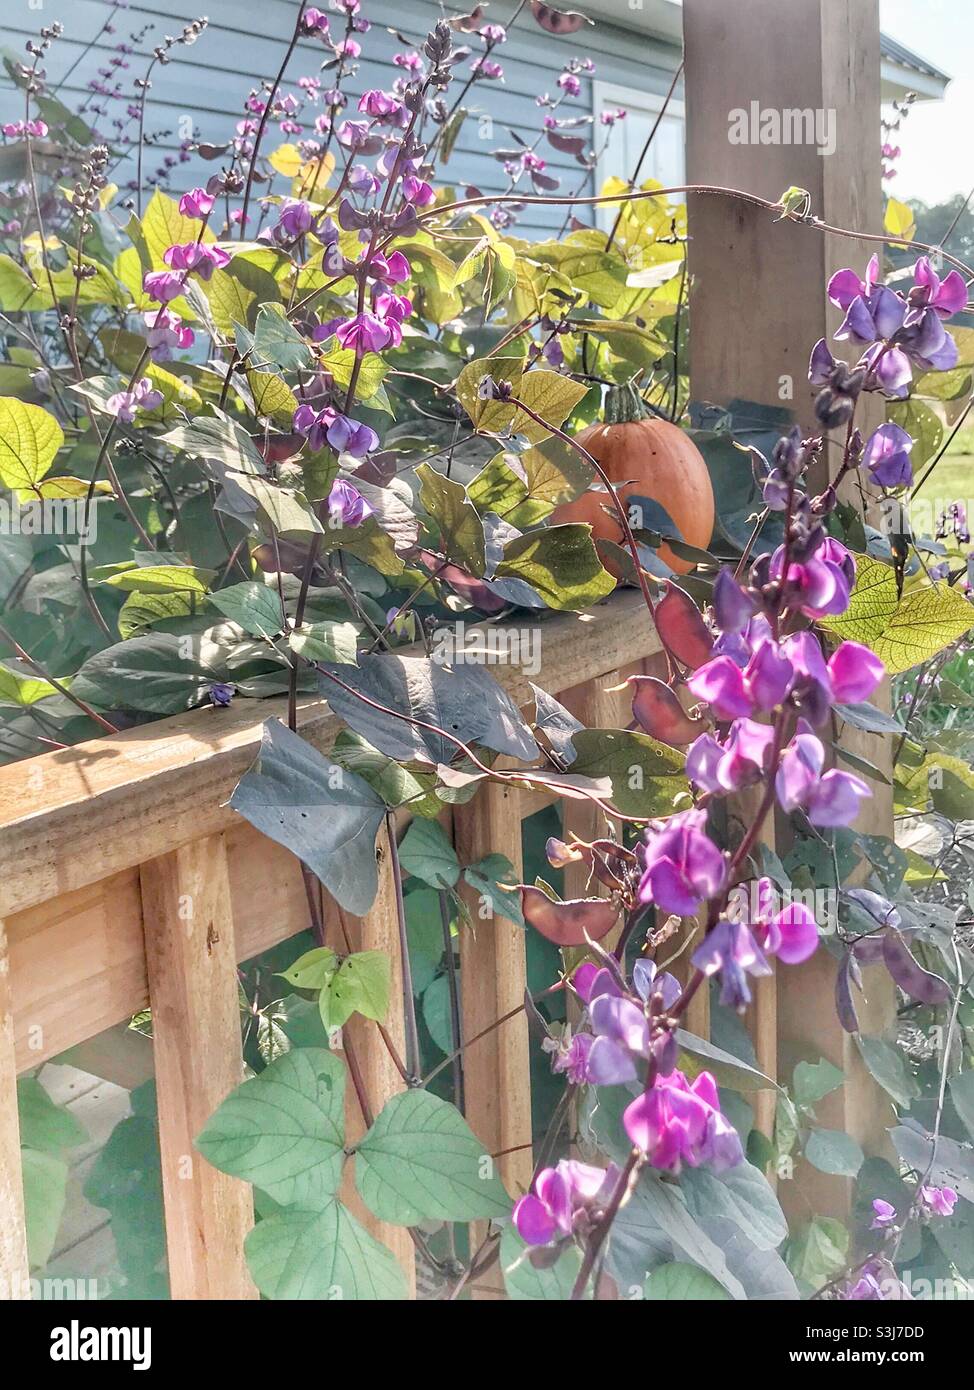 Early Autumn vibes- purple Hyacinth bean vine and blossoms surround an orange pumpkin perched on a porch railing Stock Photo